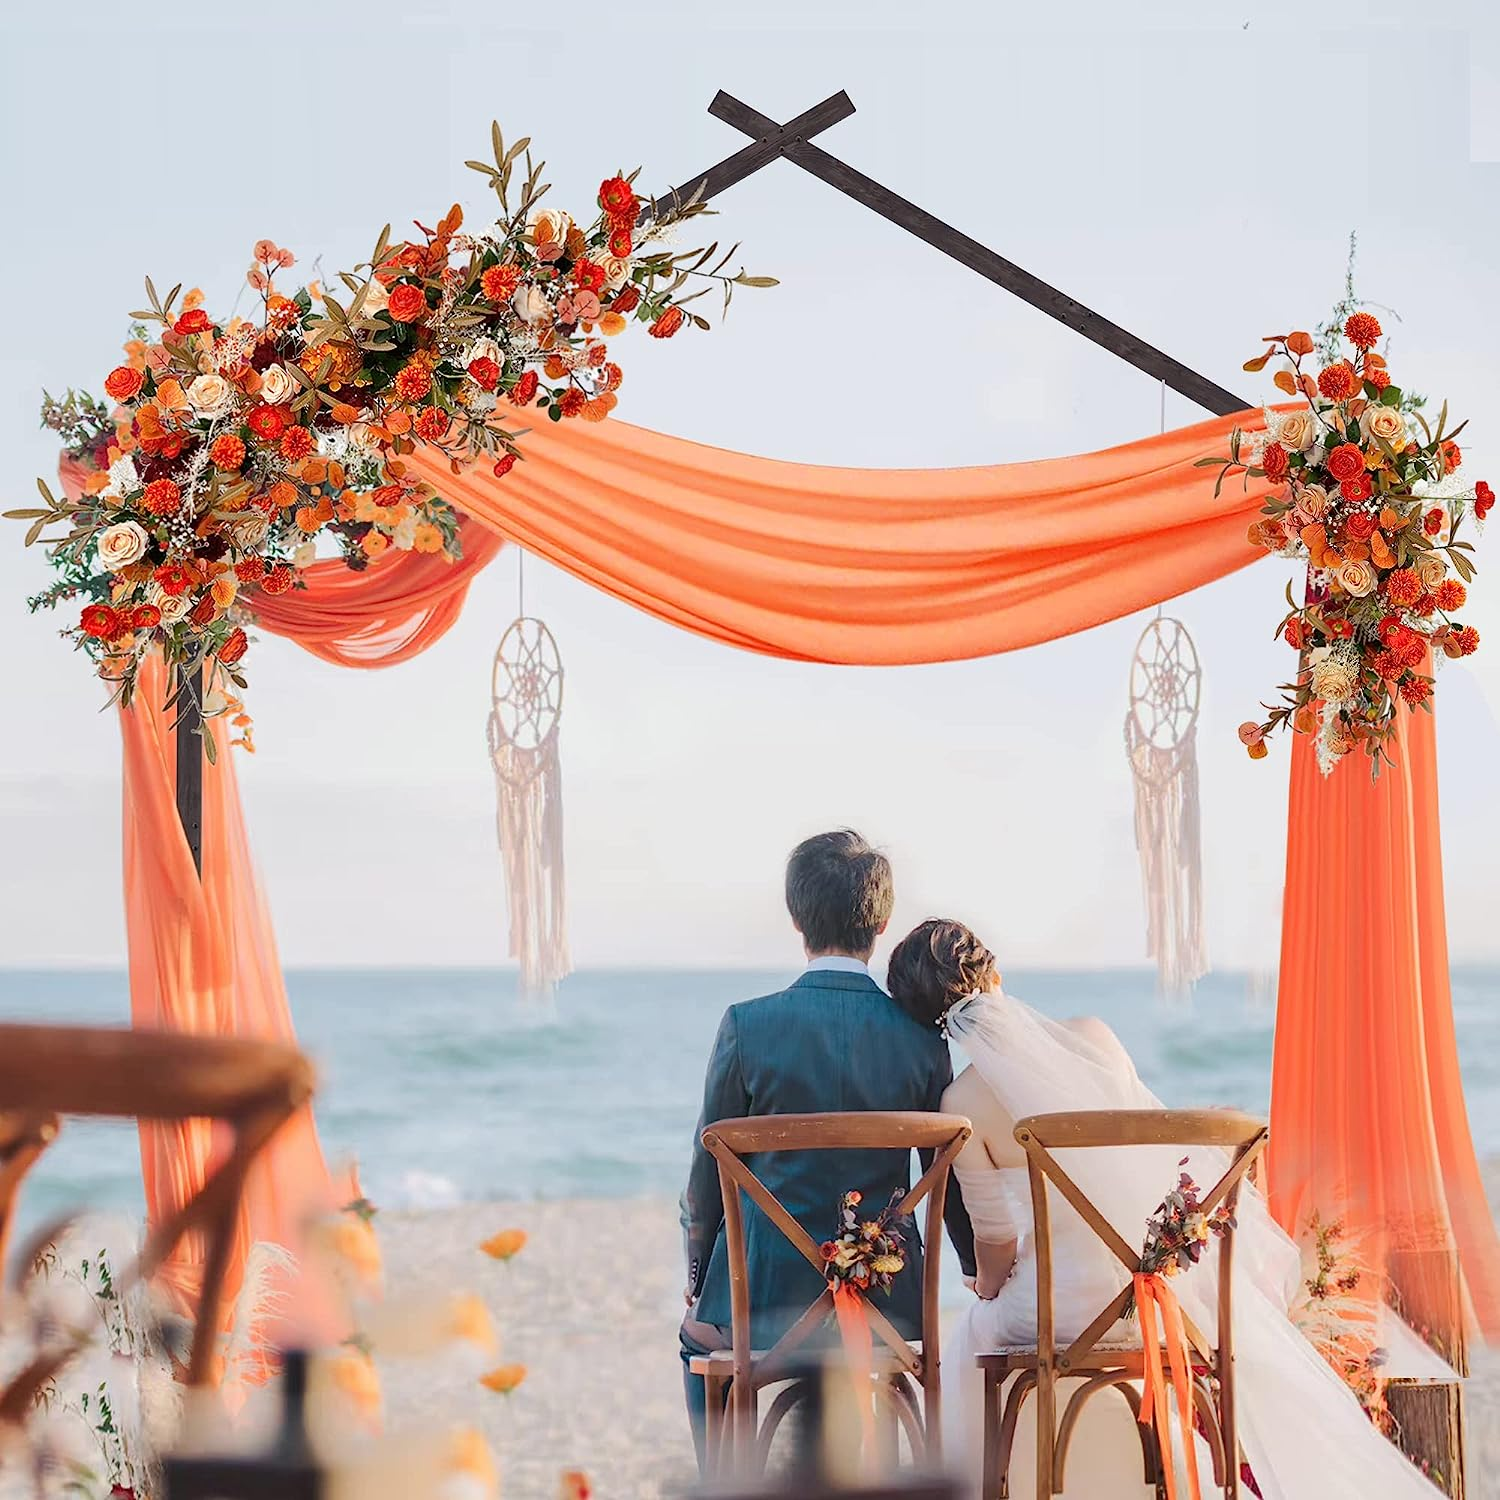 This is a rustic wooden arch that is perfect for weddings, birthdays, or any other special occasion. The arch is made of high-quality wood and is sturdy enough to support even the heaviest decorations. The arch is also easy to assemble and disassemble, so you can set it up and take it down quickly and easily. 